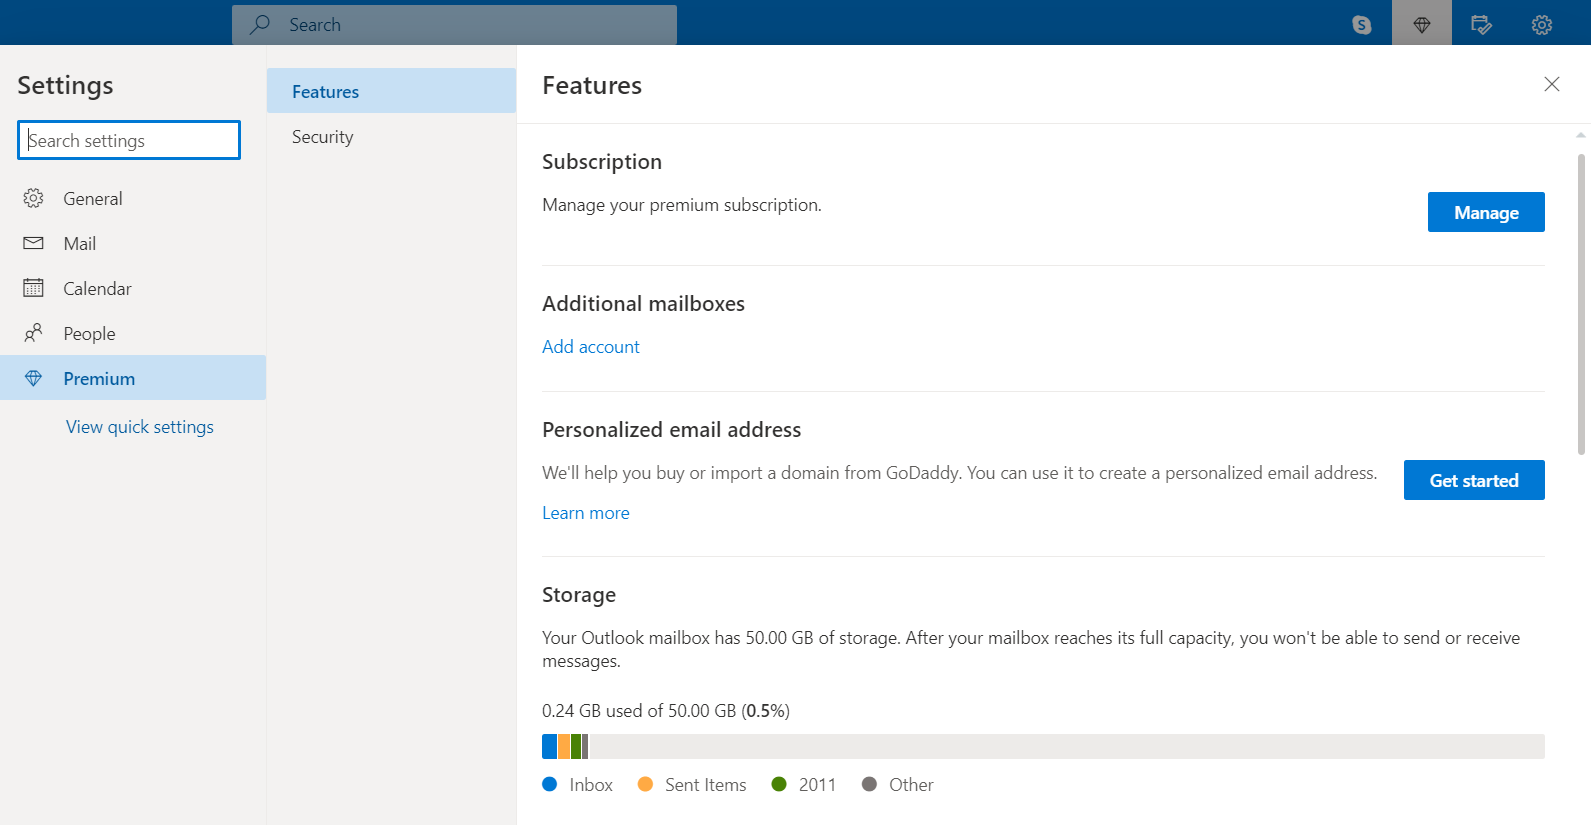 How does having a custom domain email work with Outlook?